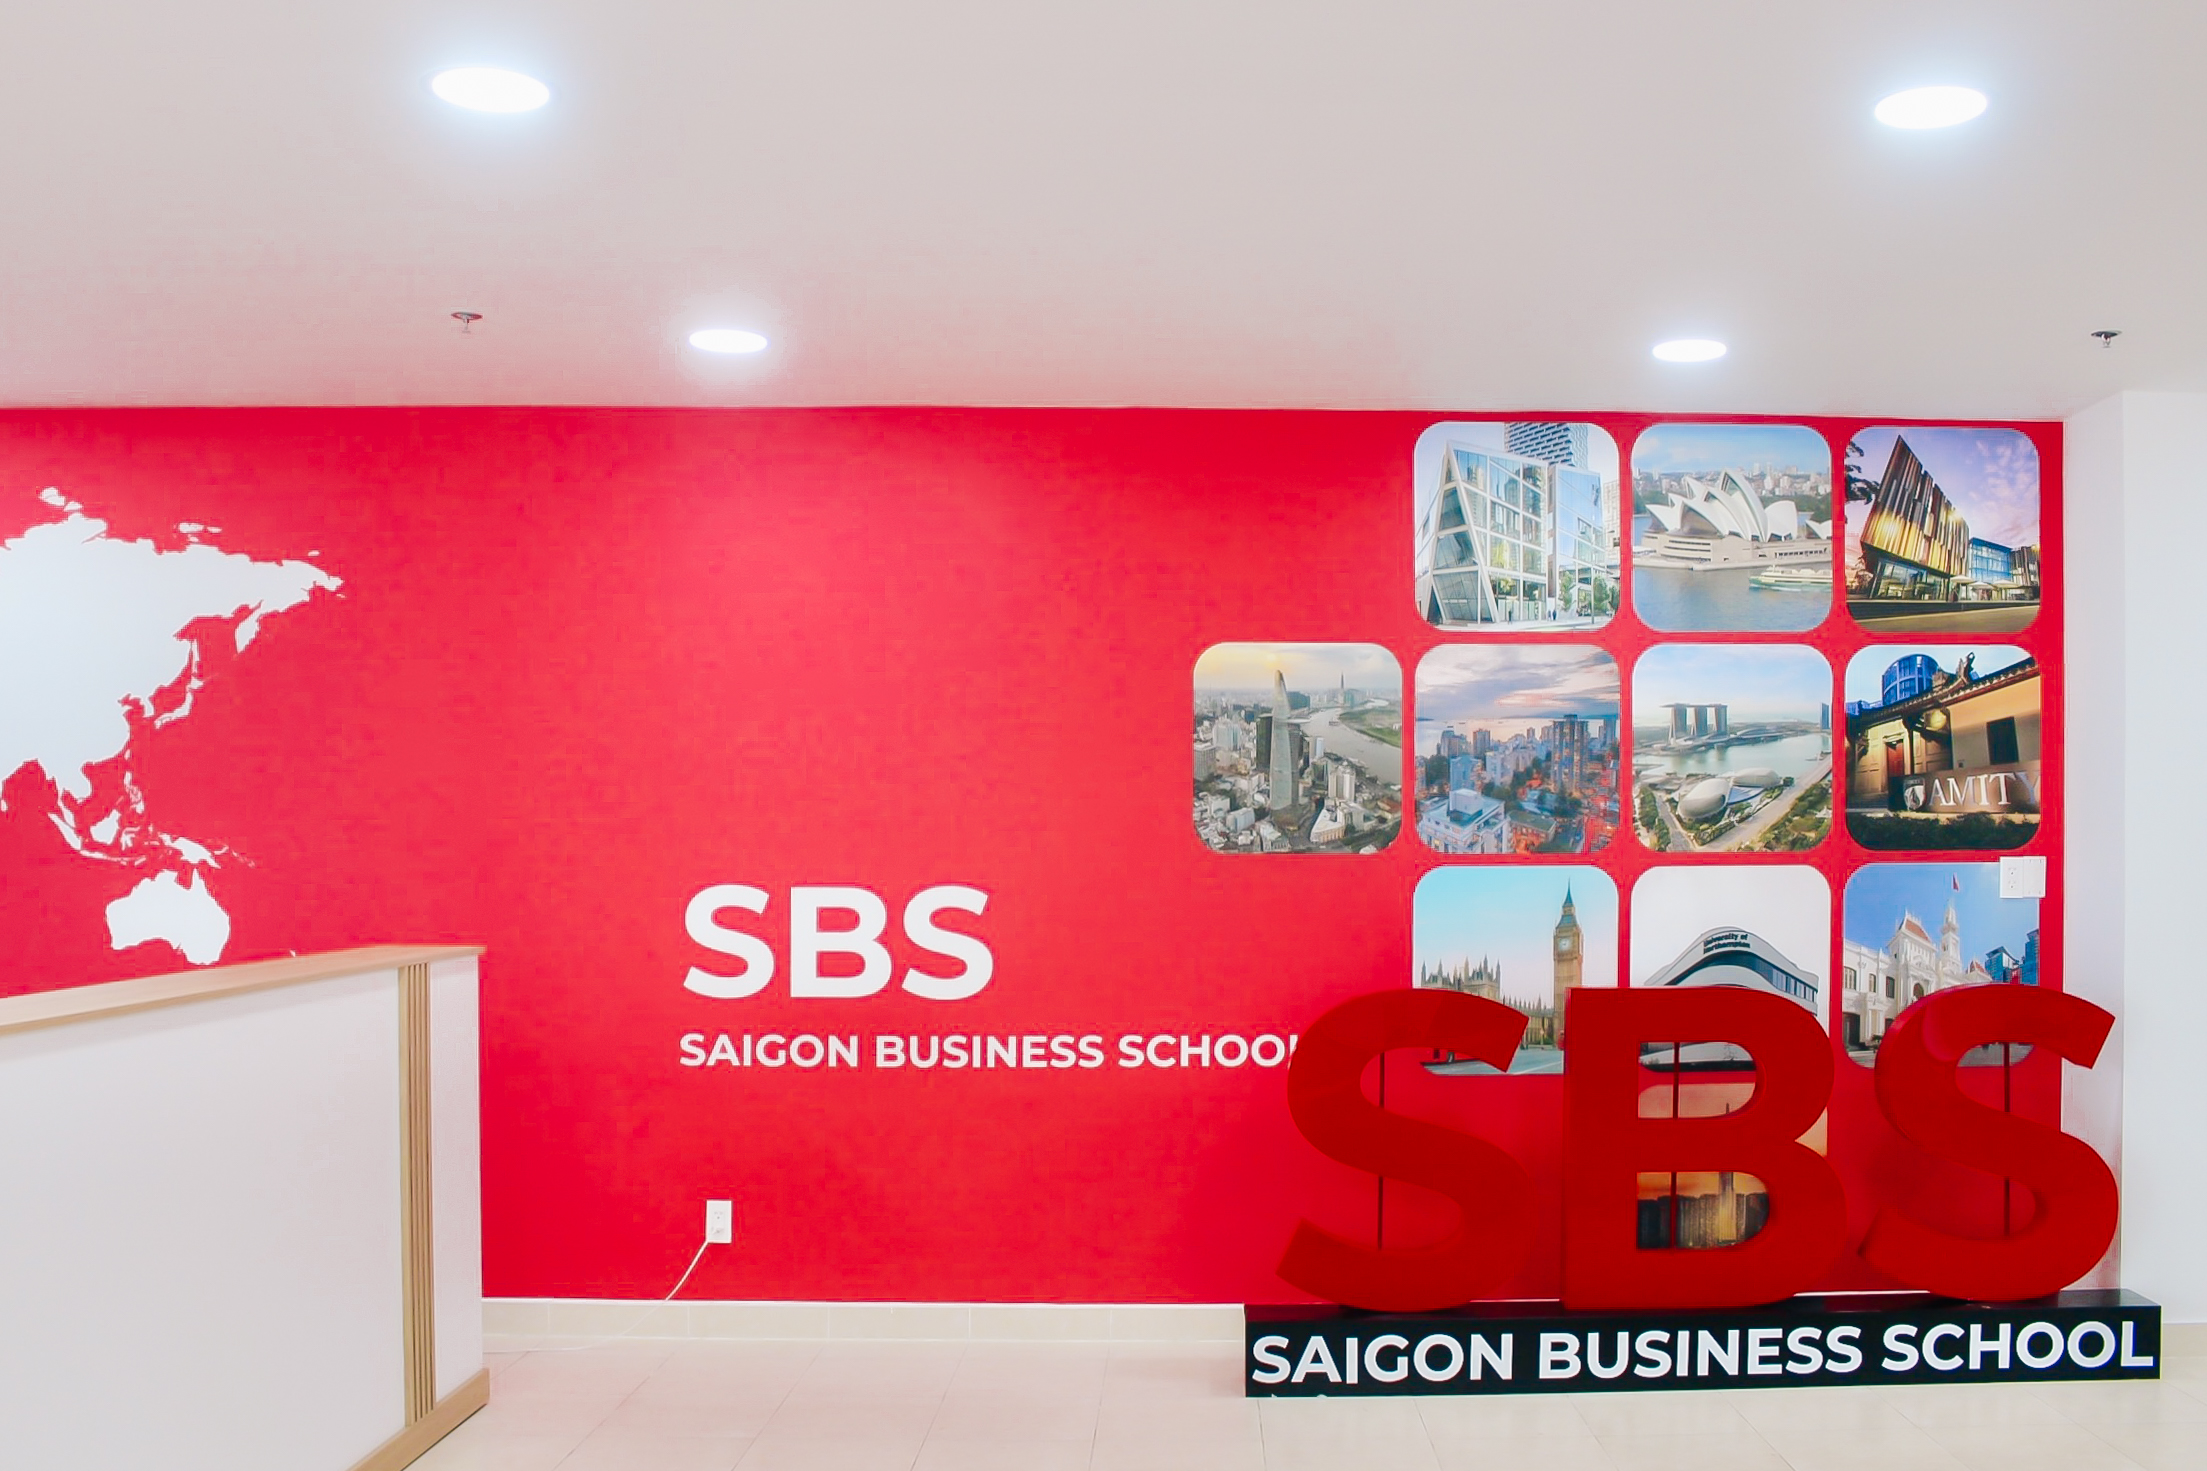 Bachelor of International Business Administration at SBS